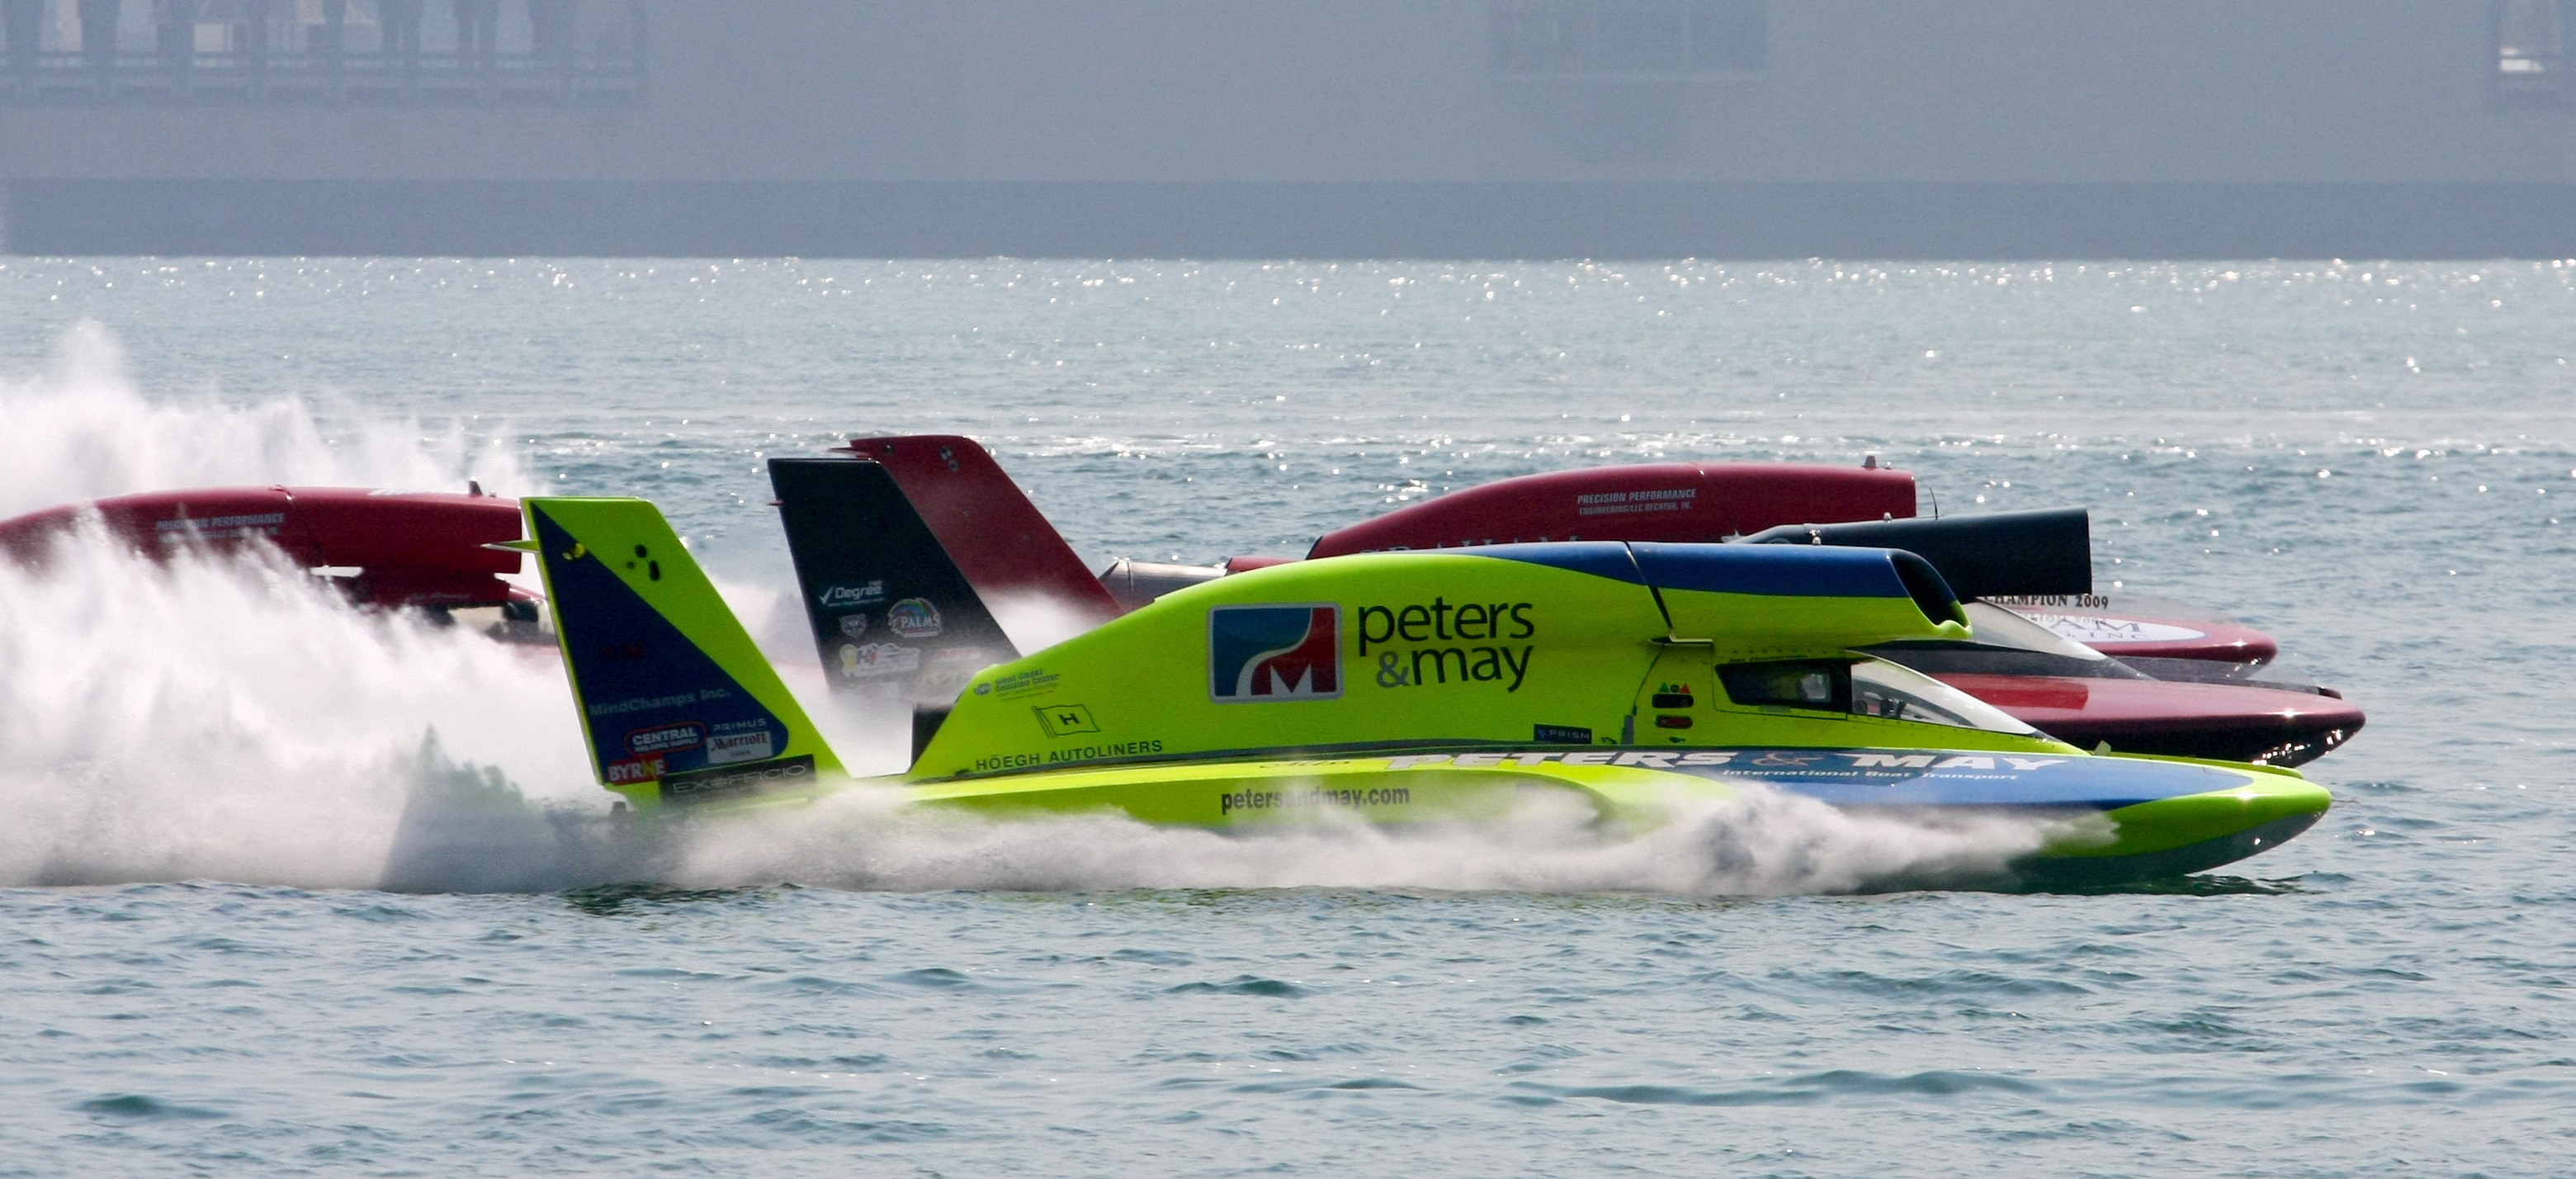 unlimited hydroplane, Race, Racing, Jet, Hydroplane, Boat, Ship, Hot, Rod, Rods Wallpaper